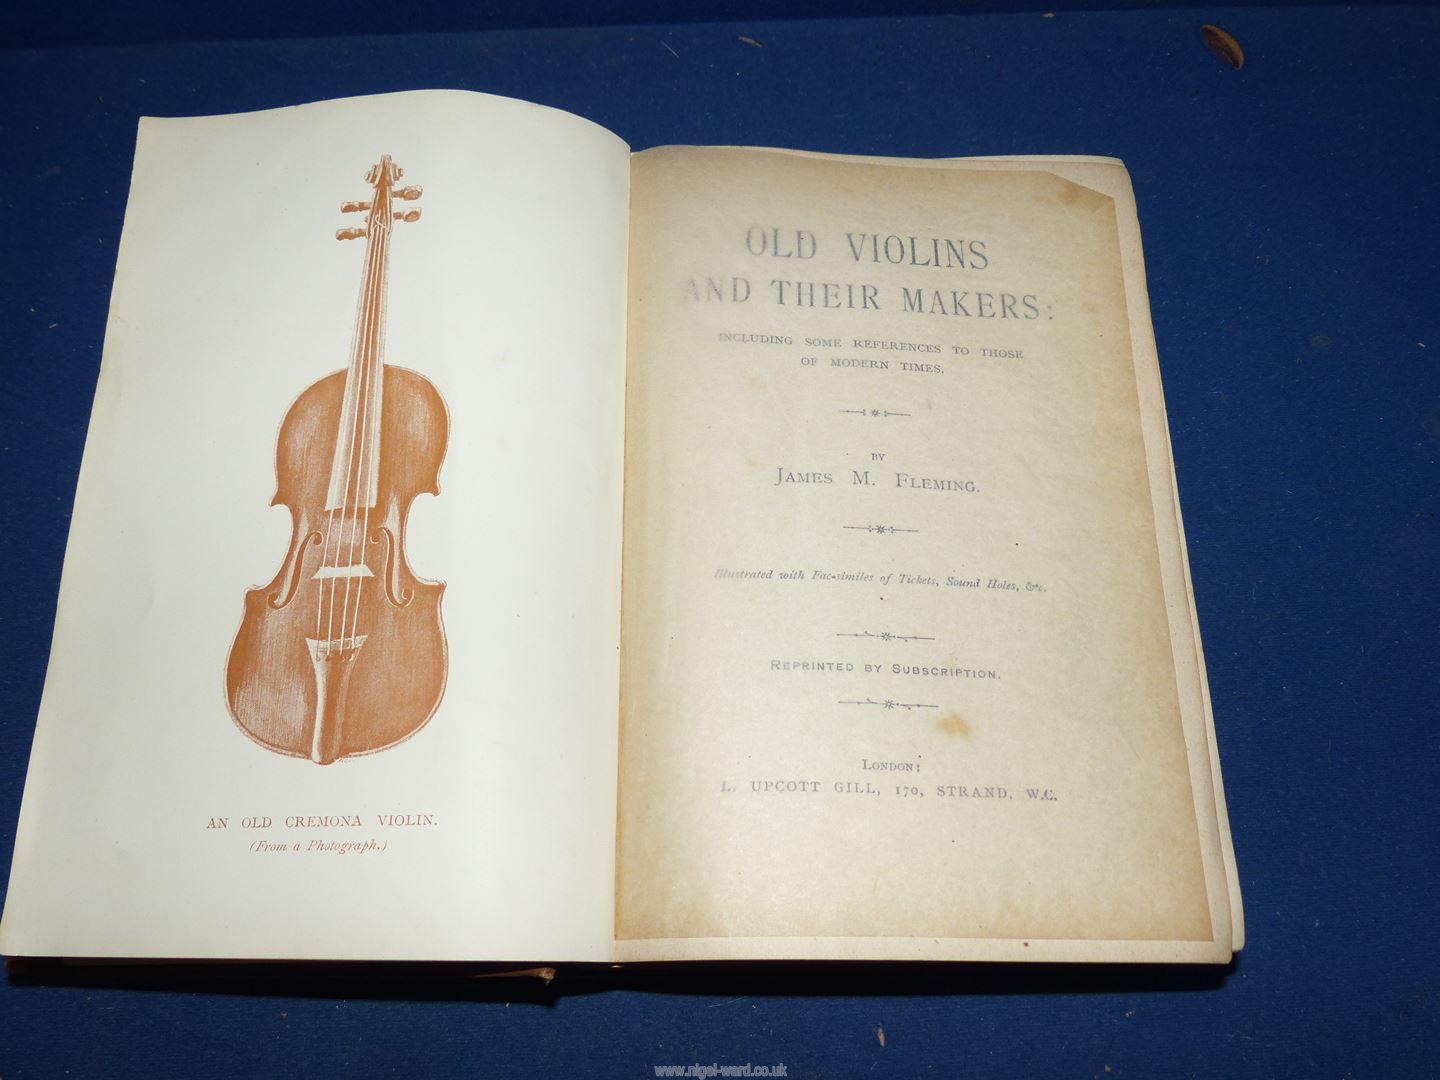 Old Violins and their Makers by James M. Fleming printed by L. Upcott Gill, 170 Strand W.C. - Image 2 of 5